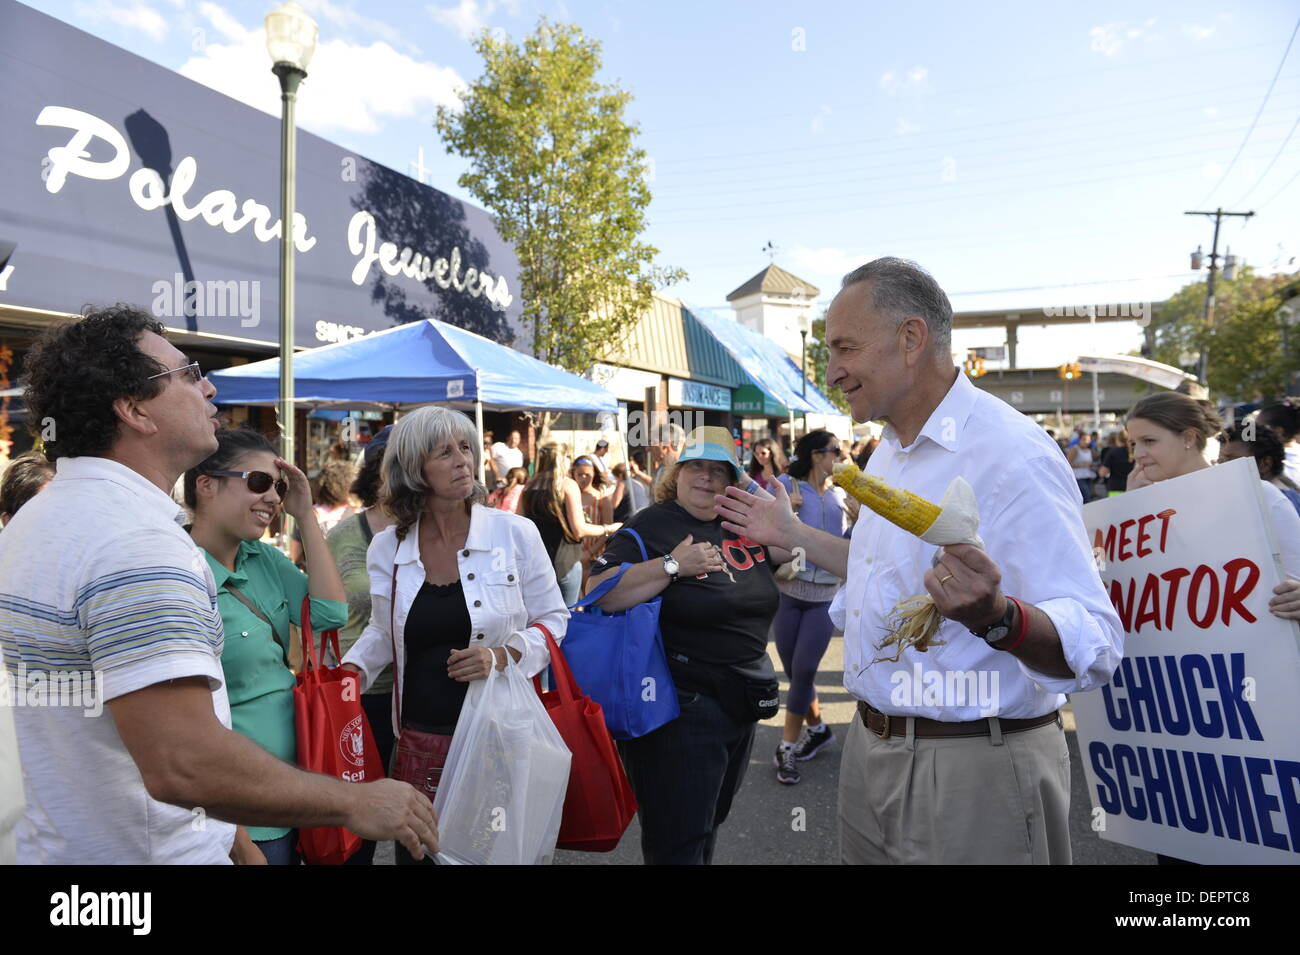 Bellmore, New York, U.S. 22nd September 2013. U.S. Senator CHARLES 'CHUCK' SCHUMER  (Democrat - New York), running for re-election in November, makes a campaign visit at the 27th Annual Bellmore Festival, featuring family fun with exhibits and attractions in a 25 square block area, with over 120,000 people expected to attend over the weekend. Stock Photo